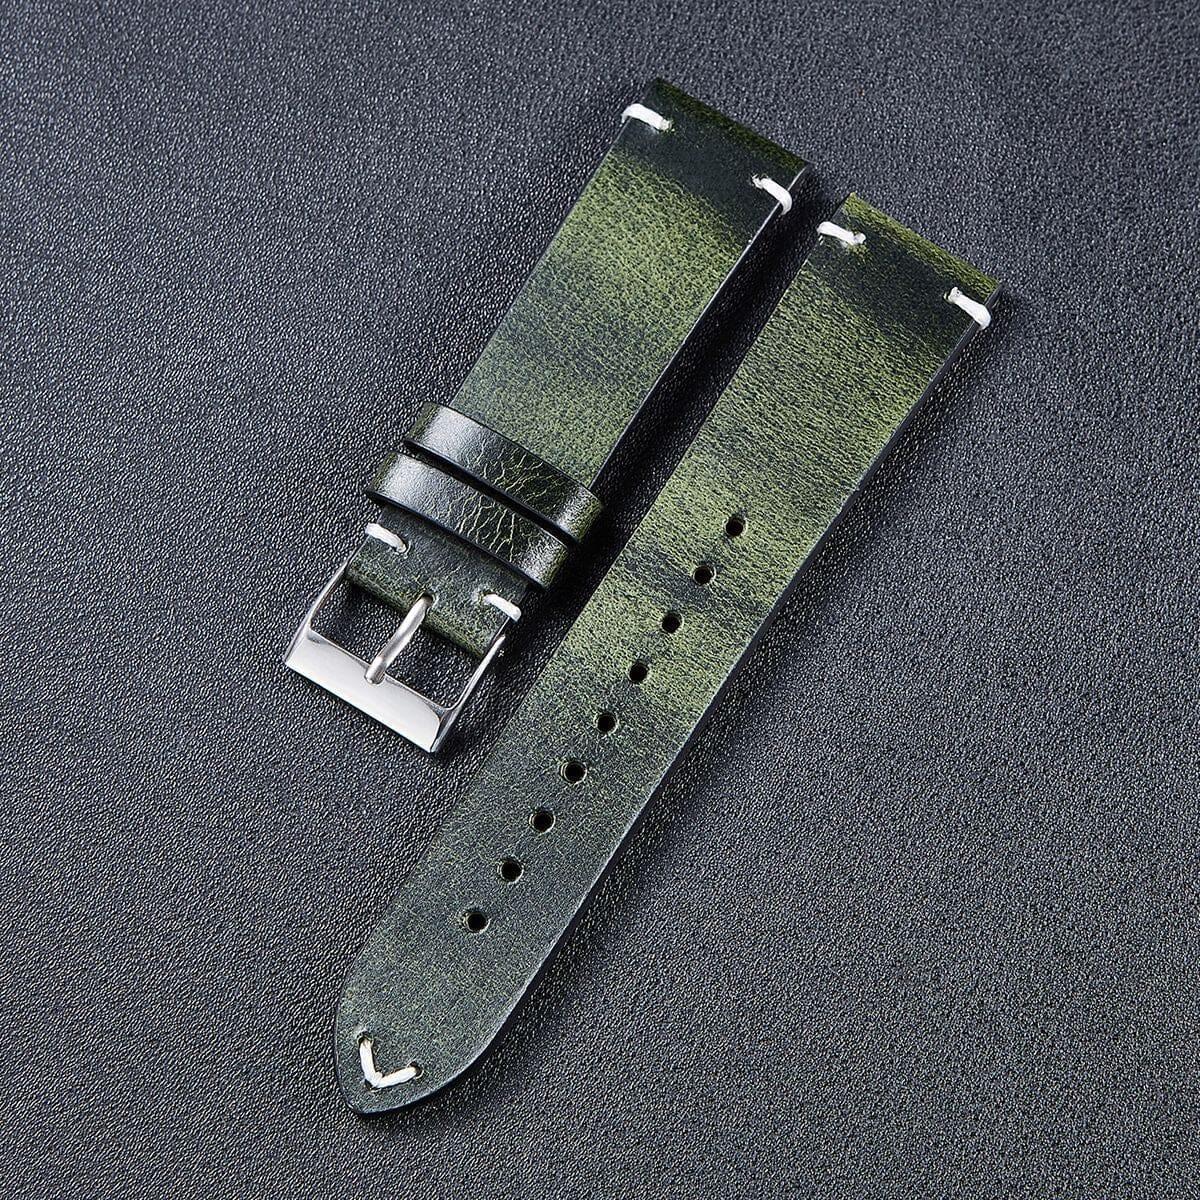 Vintage Oiled Leather Watch Straps Compatible with the Citizen 20mm Range